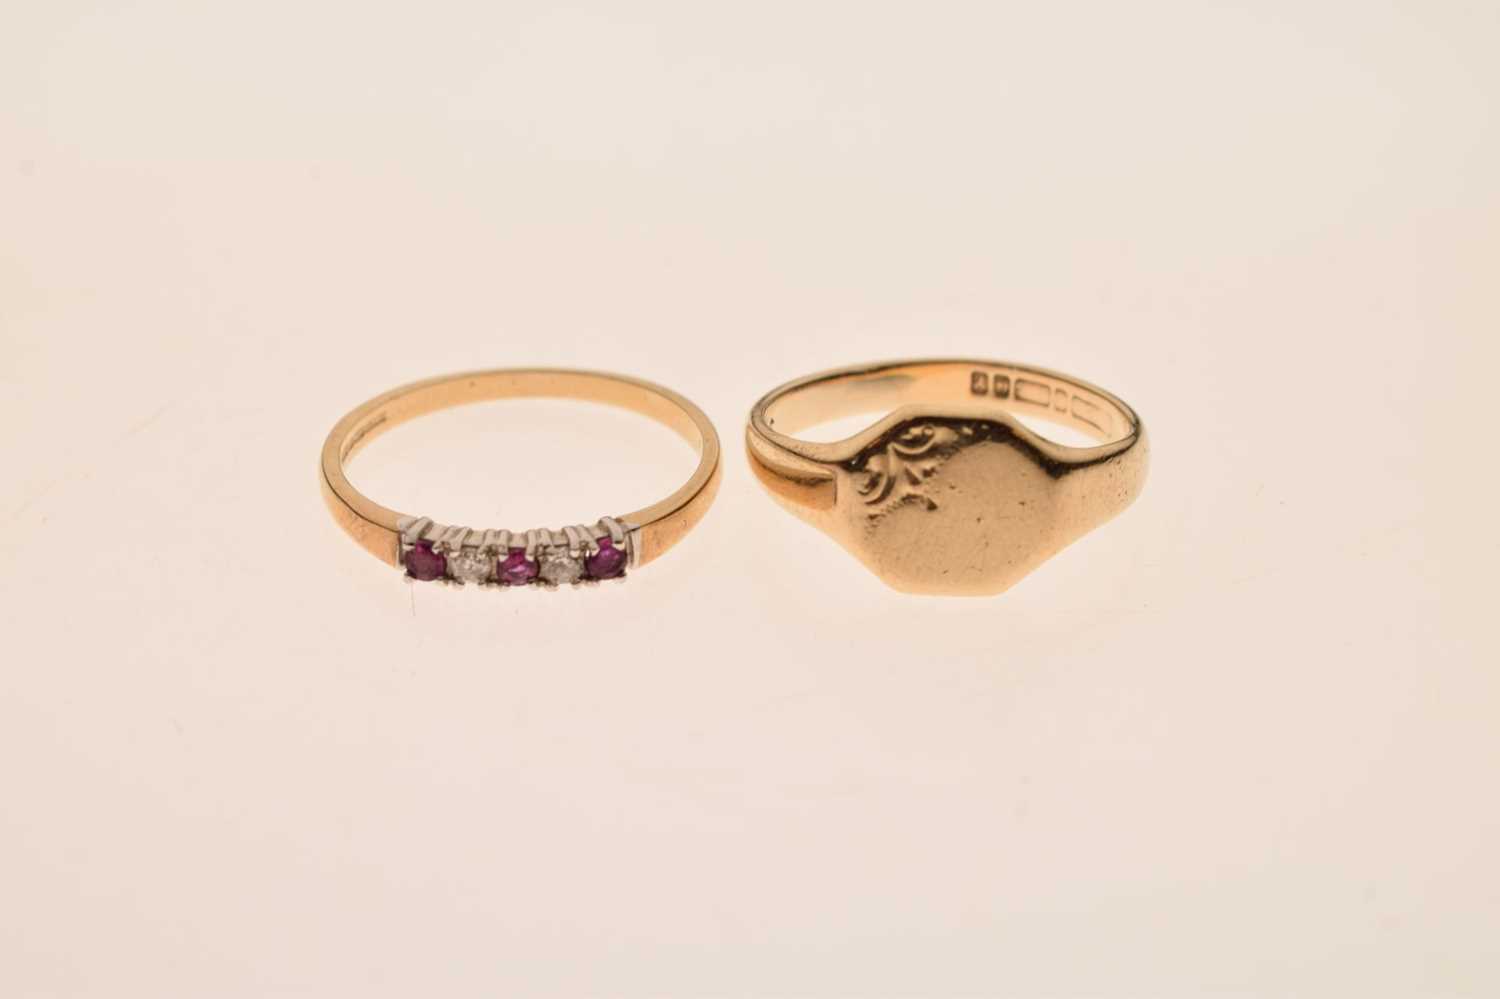 9ct gold ruby and diamond five-stone half eternity ring, and a 9ct gold signet ring - Image 6 of 6